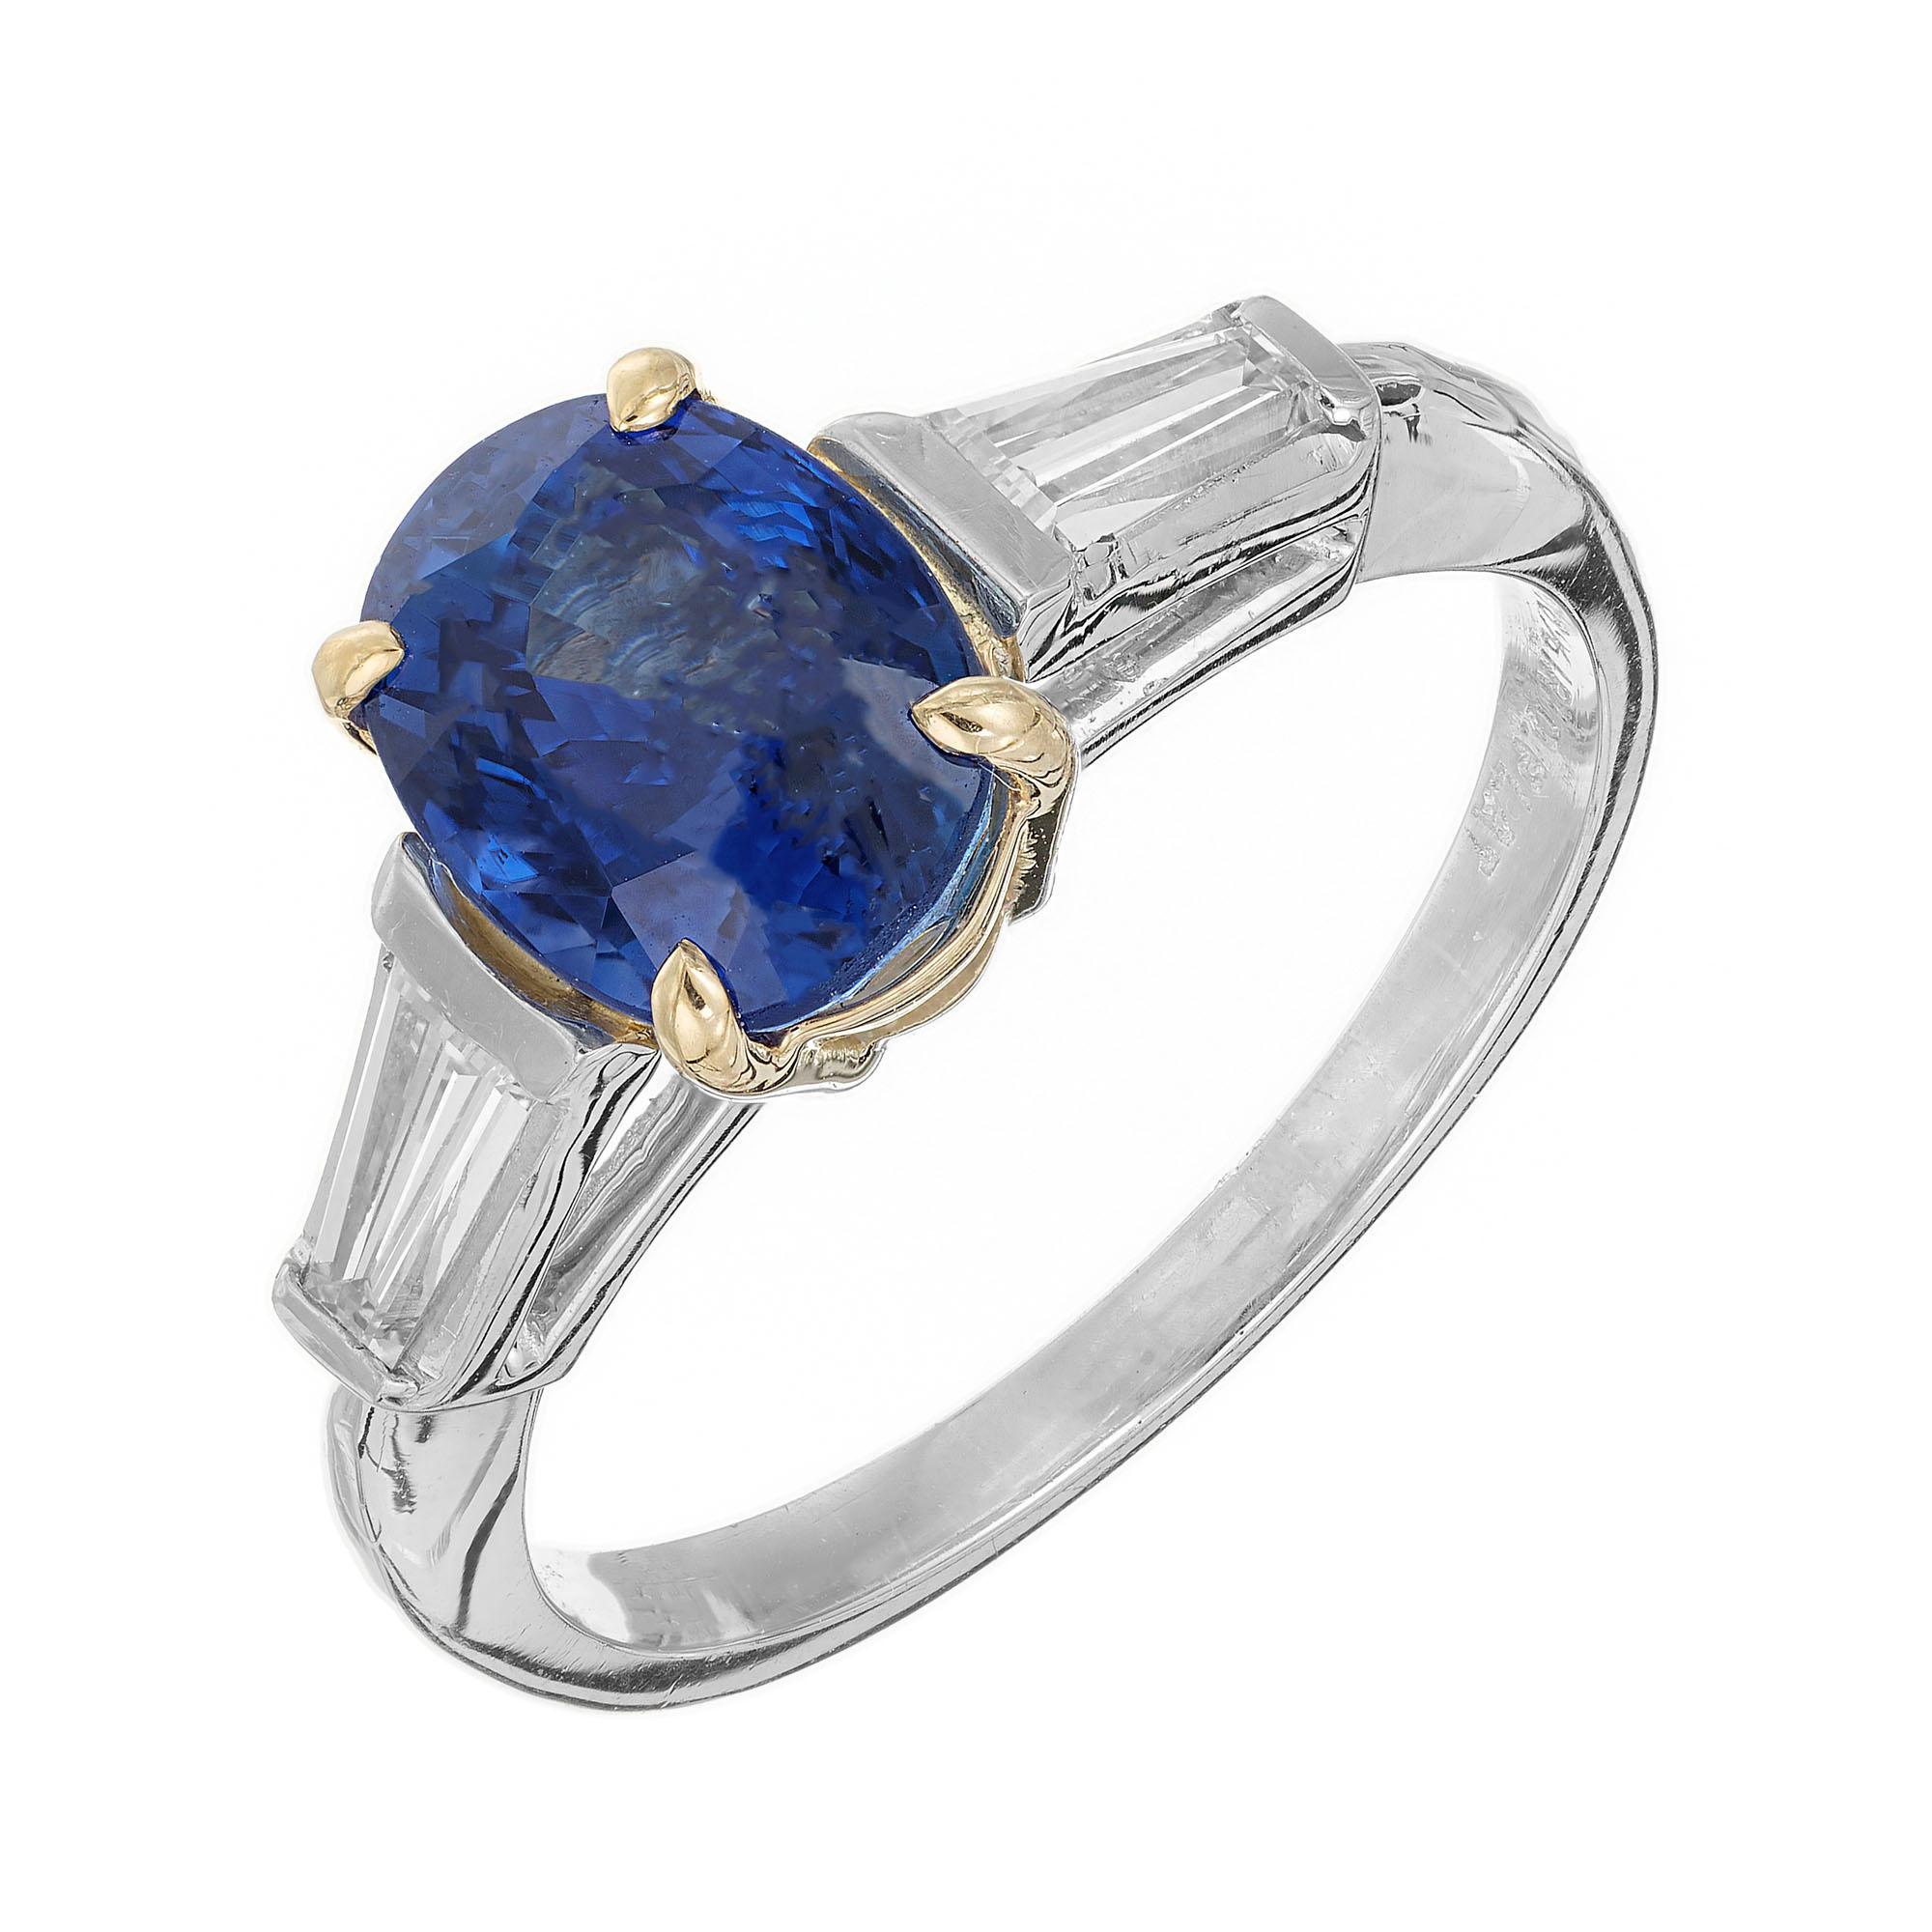 Sapphire and diamond engagement ring. GIA certified center oval sapphire center stone, set in a platinum and 18k yellow gold setting with 2 tapered baguette side diamonds. The sapphire is from a 1930's estate. Created in the Peter Suchy Workshop.